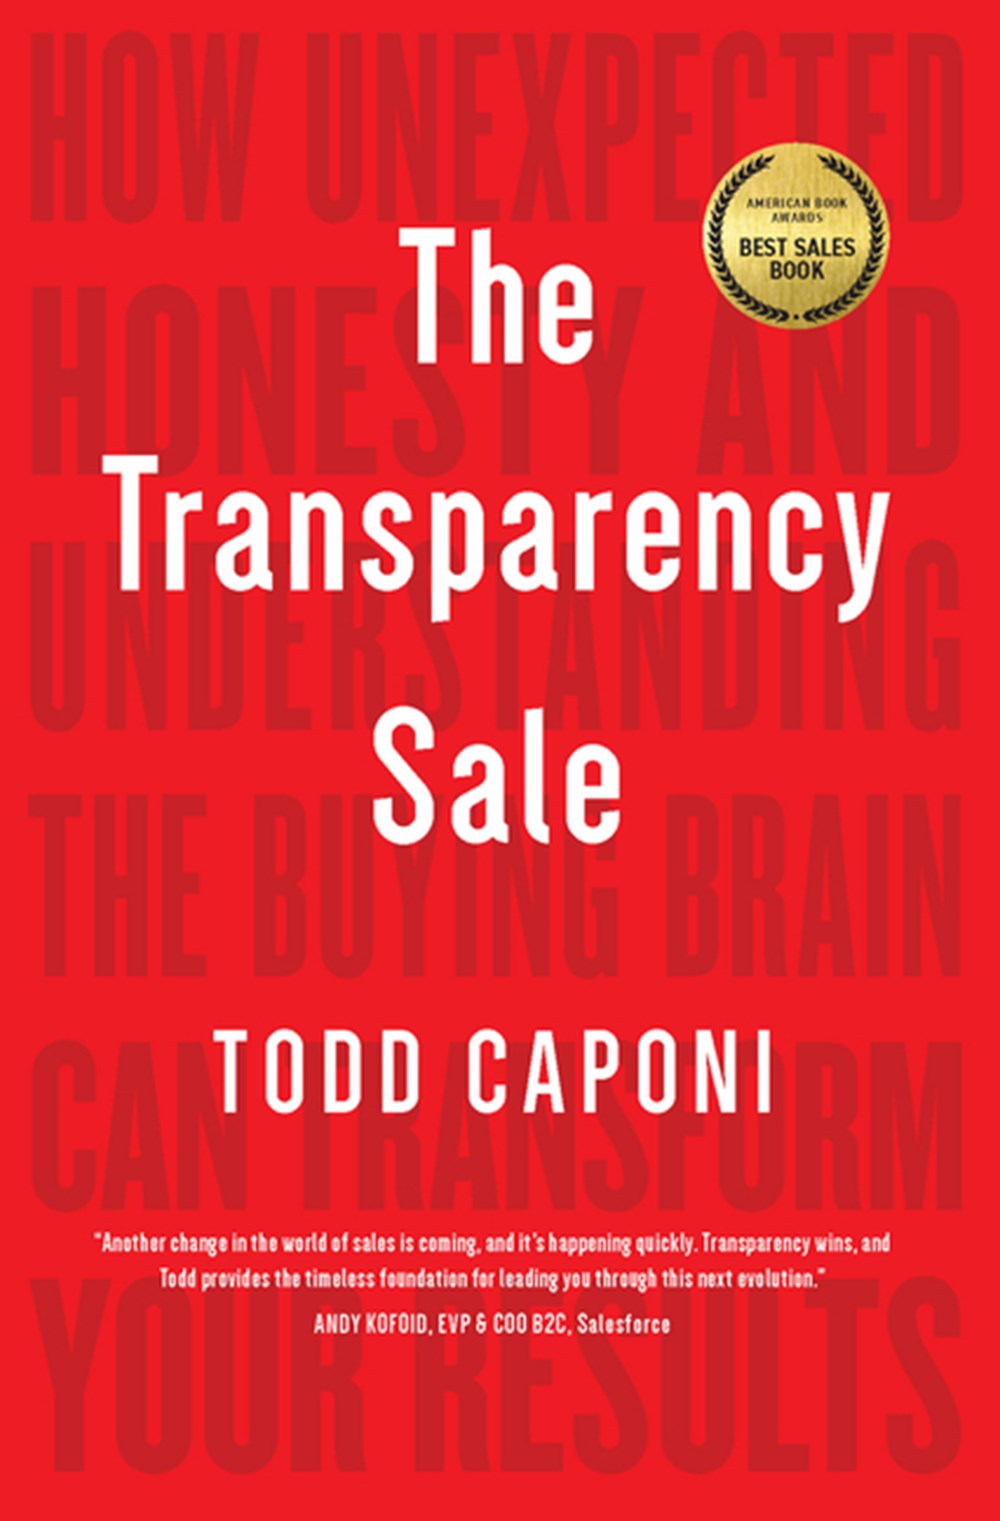 Transparency Sale: How Unexpected Honesty and Understanding the Buying Brain Can Transform Your Resu